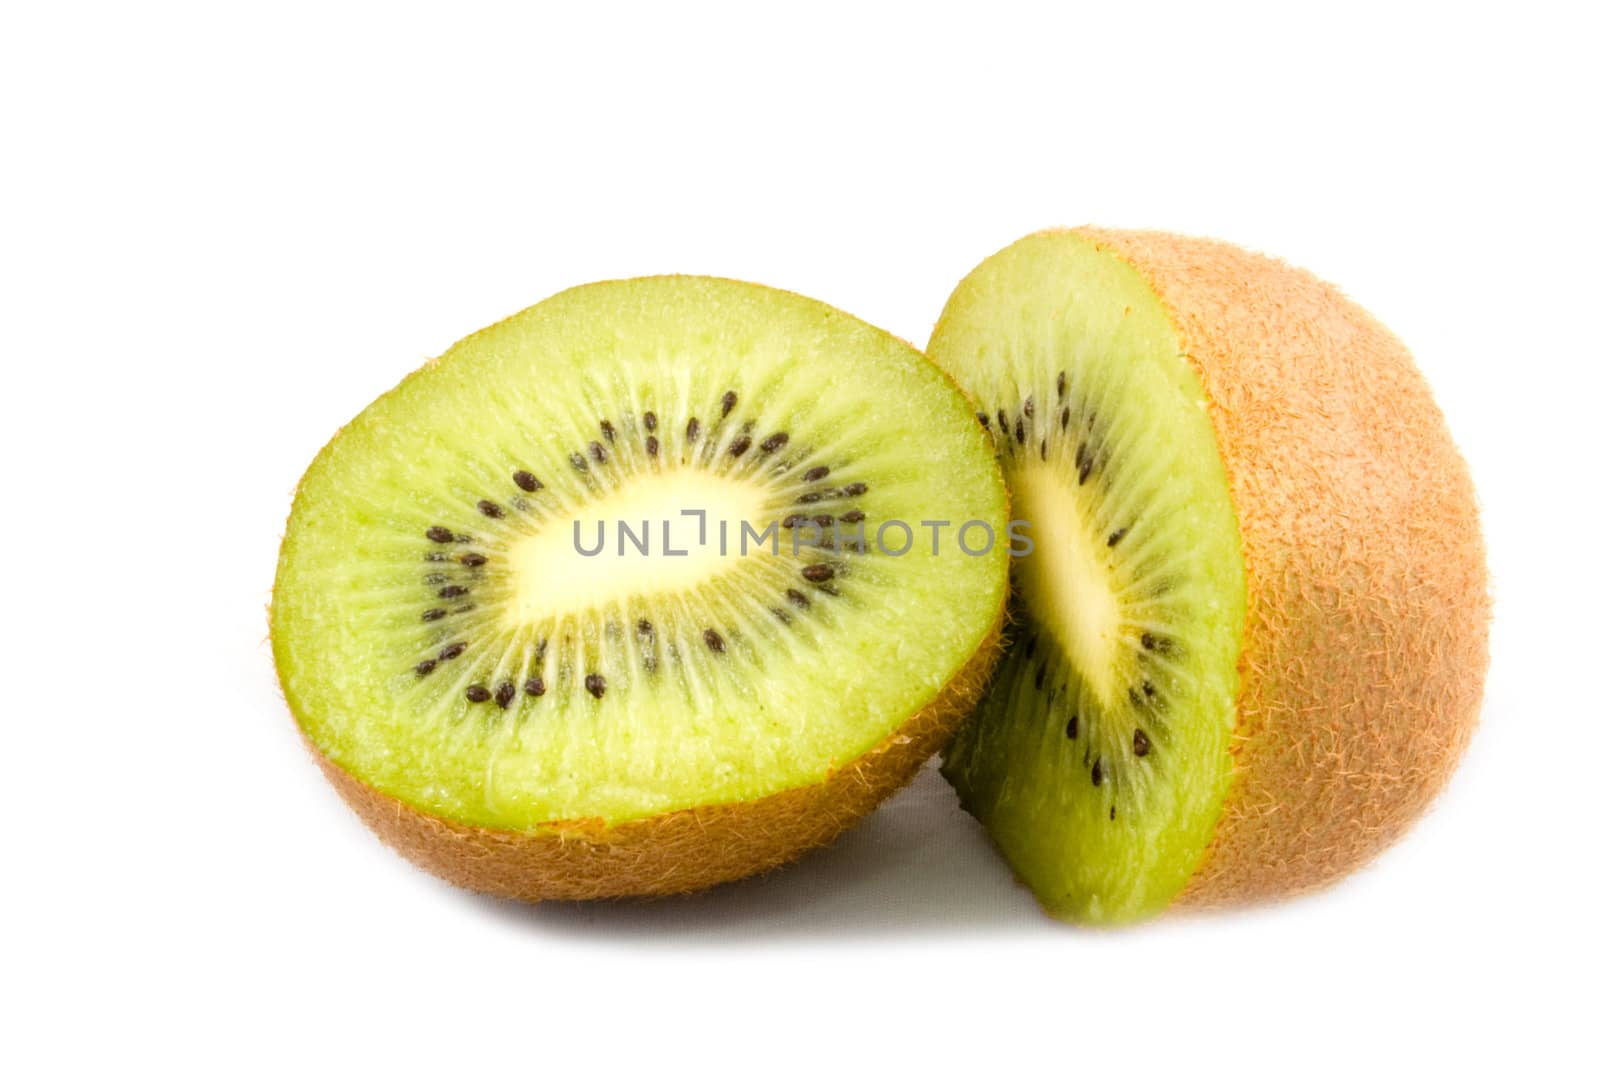 Parts of a kiwi on a white background by ladyminnie